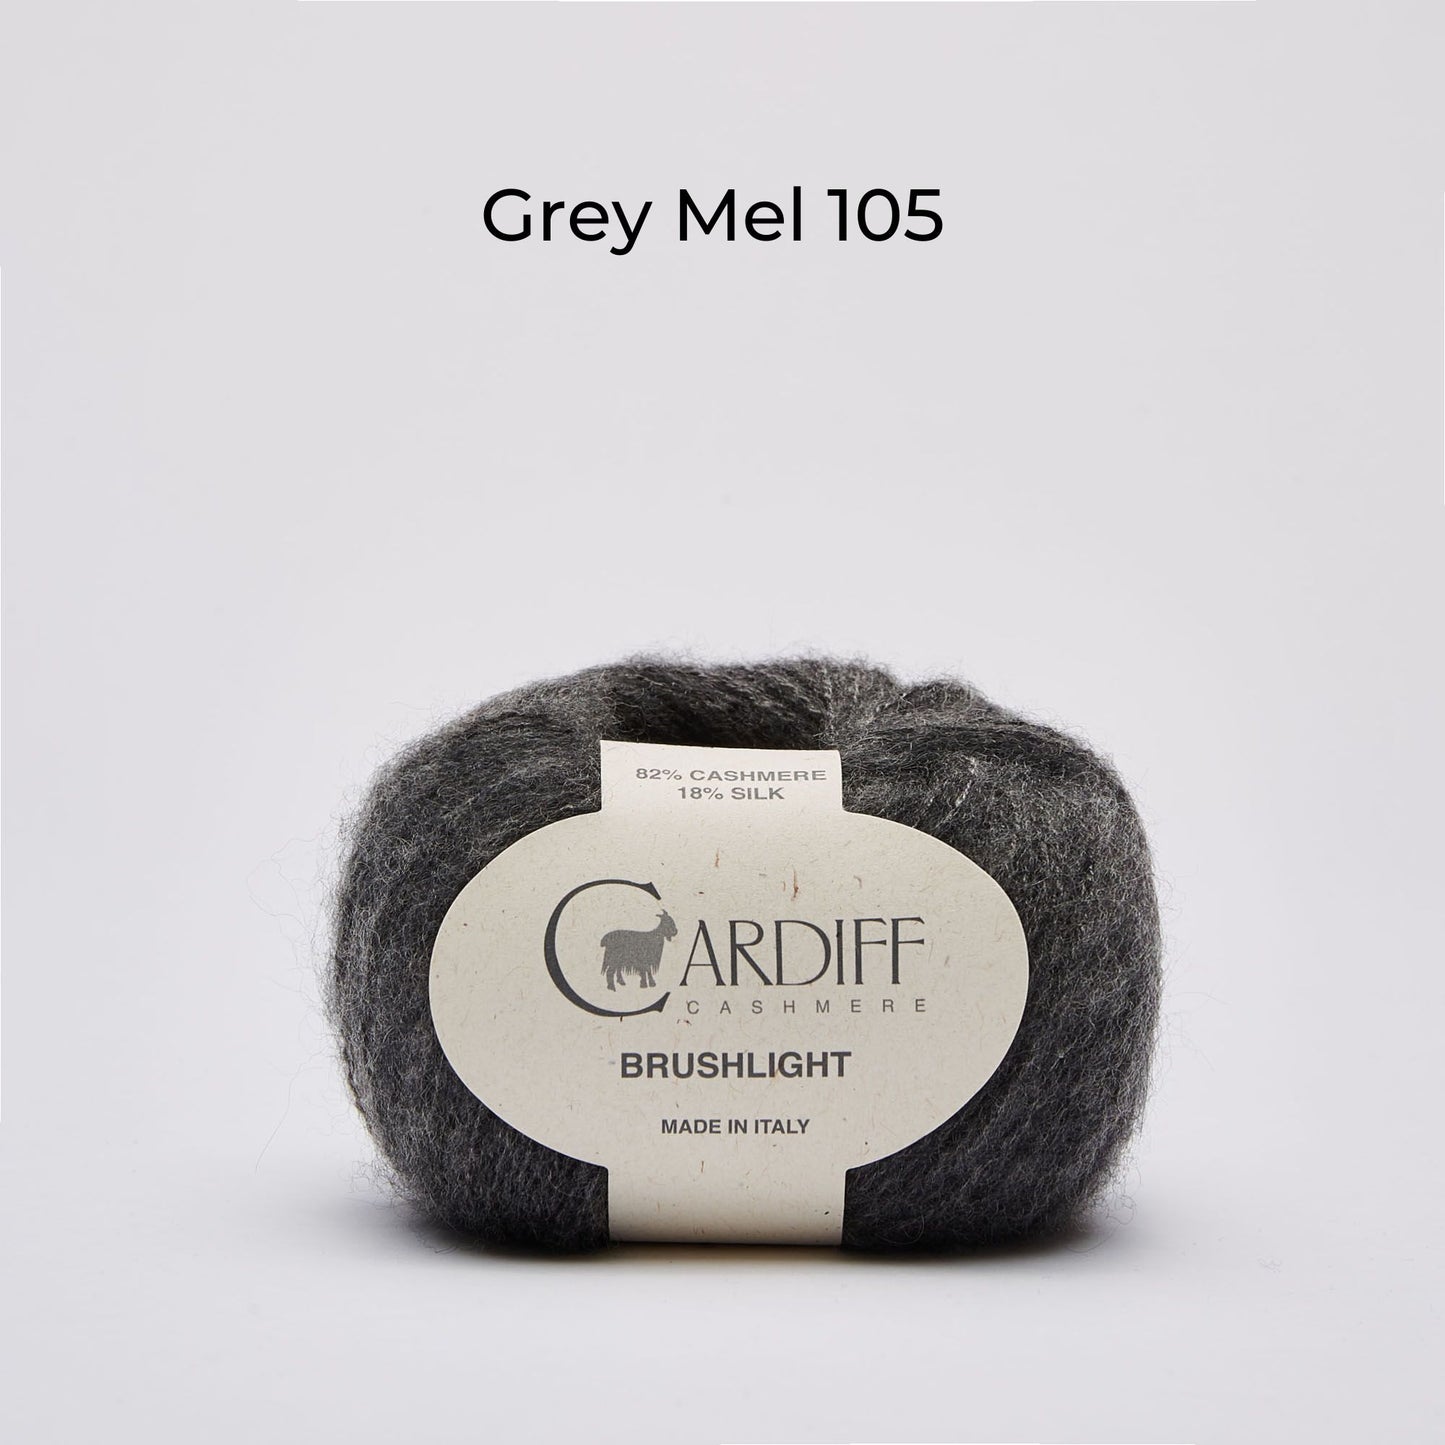 Kaschmirwolle - Cardiff Cashmere Brushlight - NS 3.5-4mm